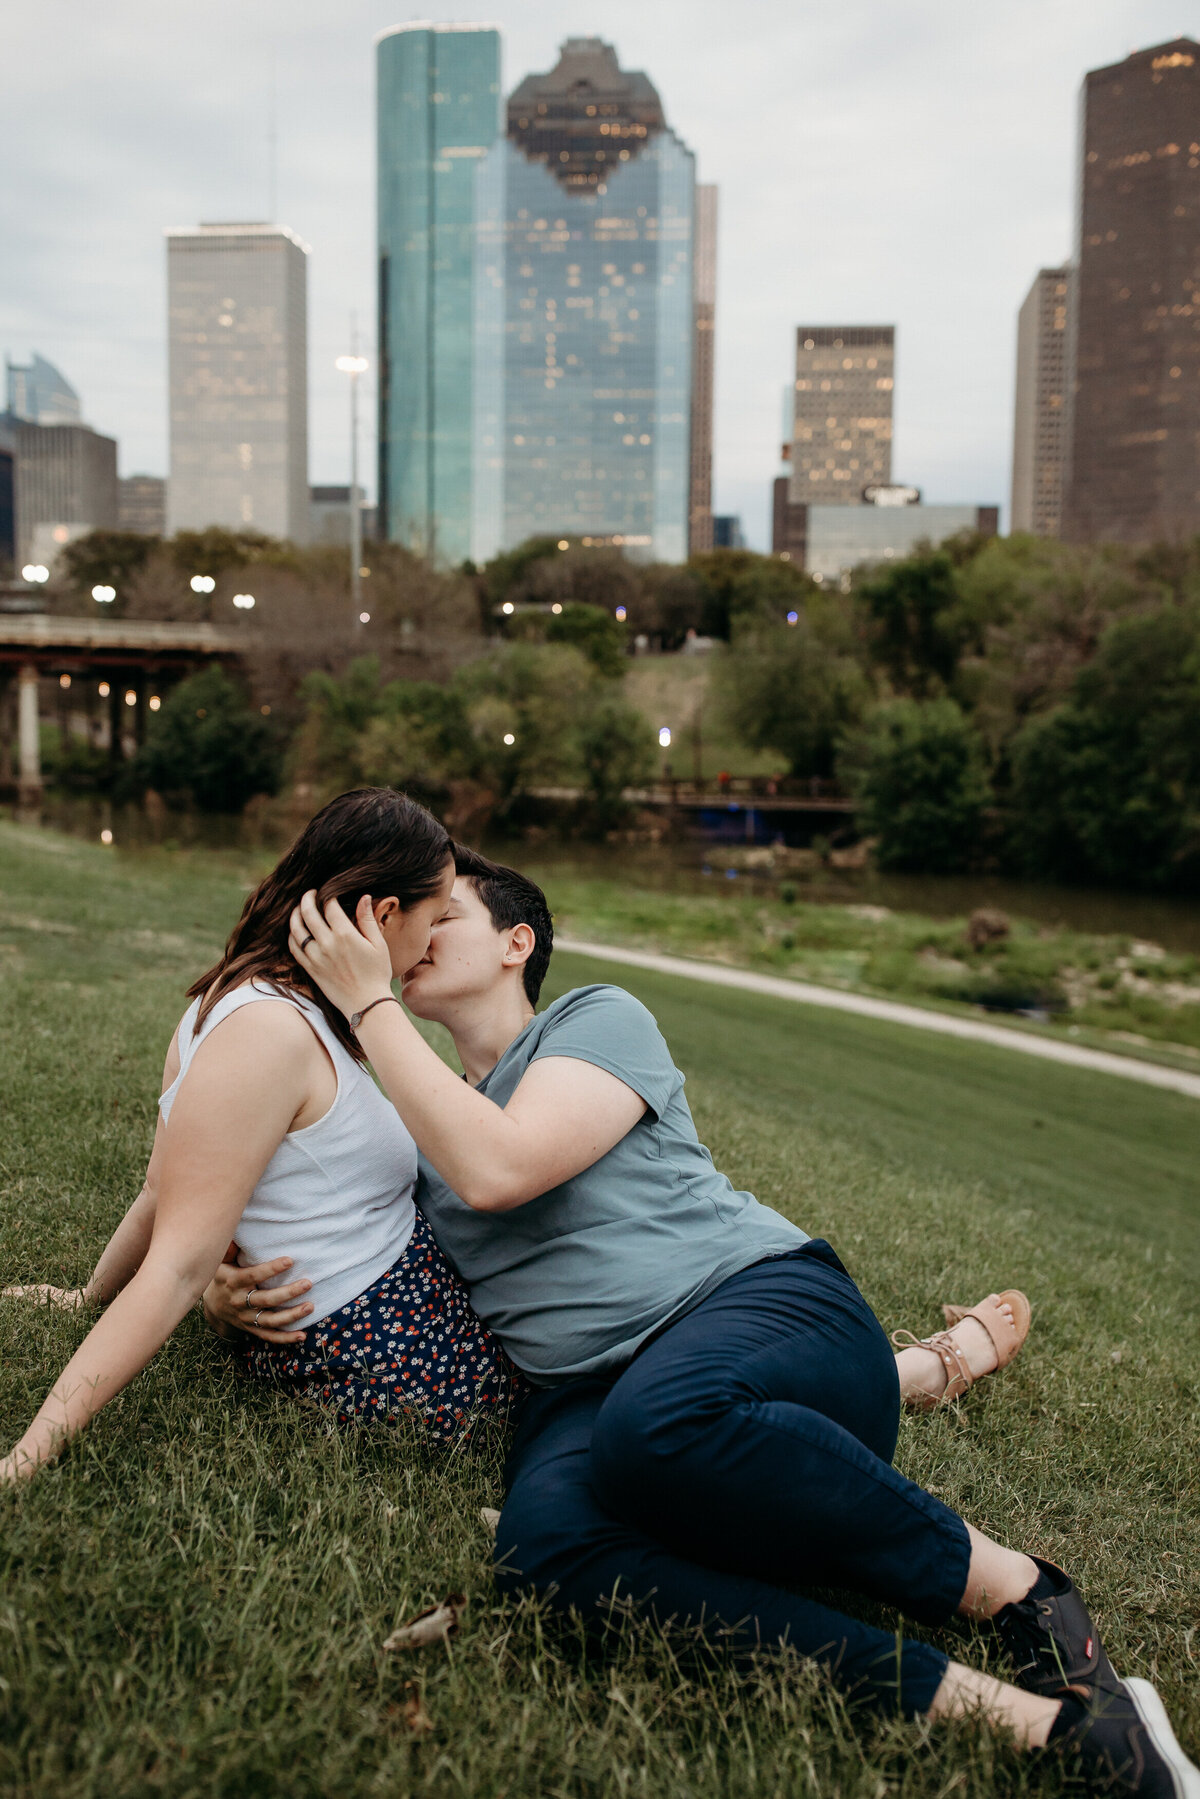 A couple sharing a kiss on a grassy field with a city skyline in the background during dusk